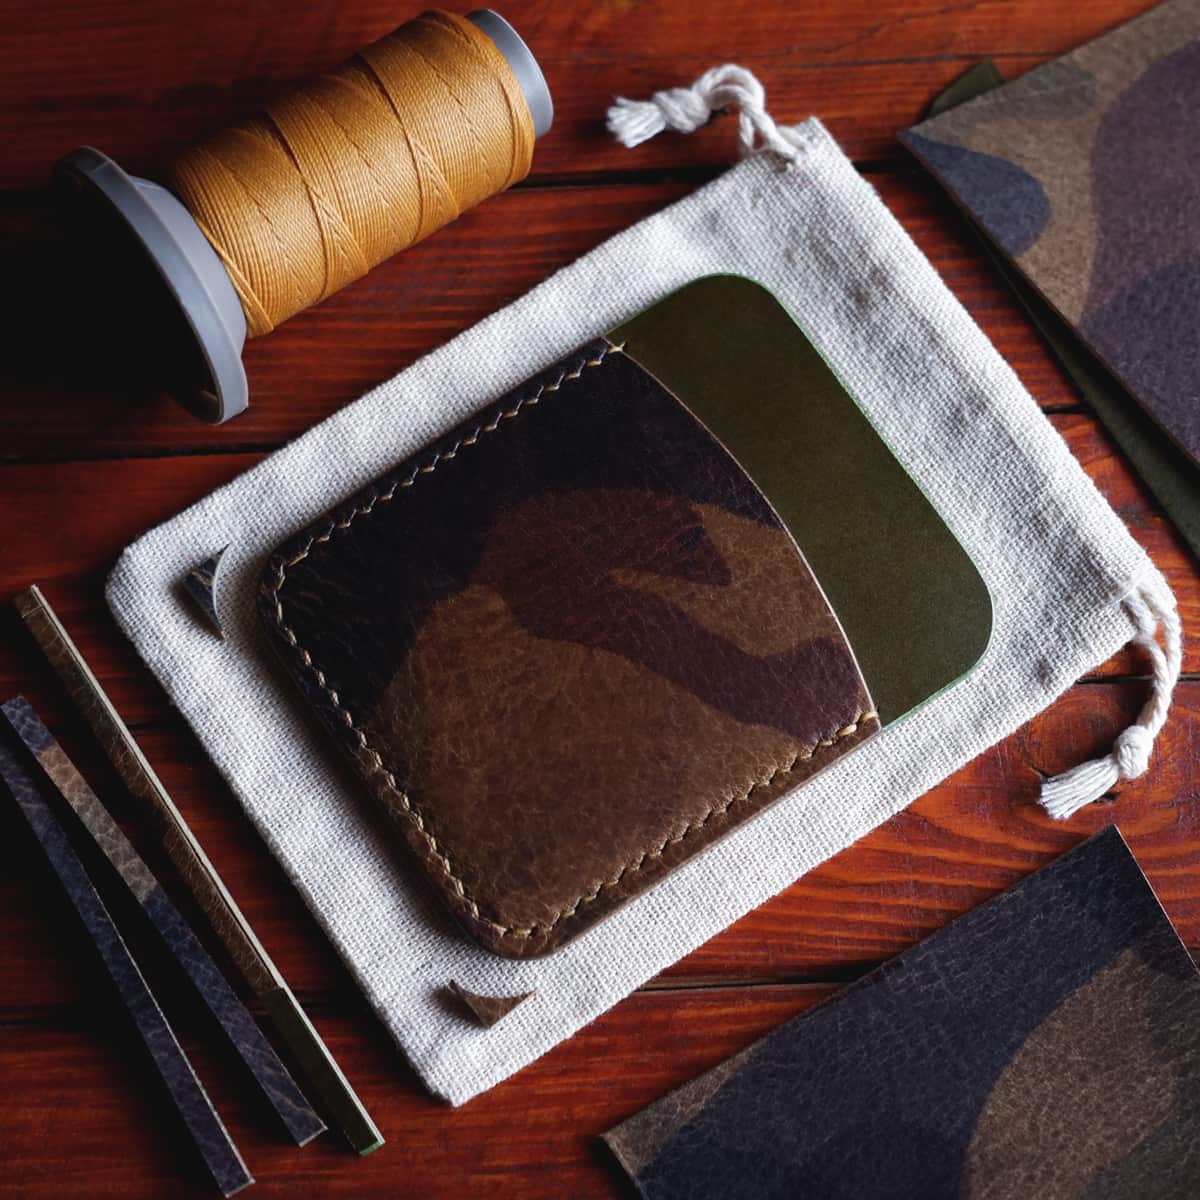 Tabletop view of The Palm Card Holder in El Vaquero and Olive Buttero vegetable tanned leathers